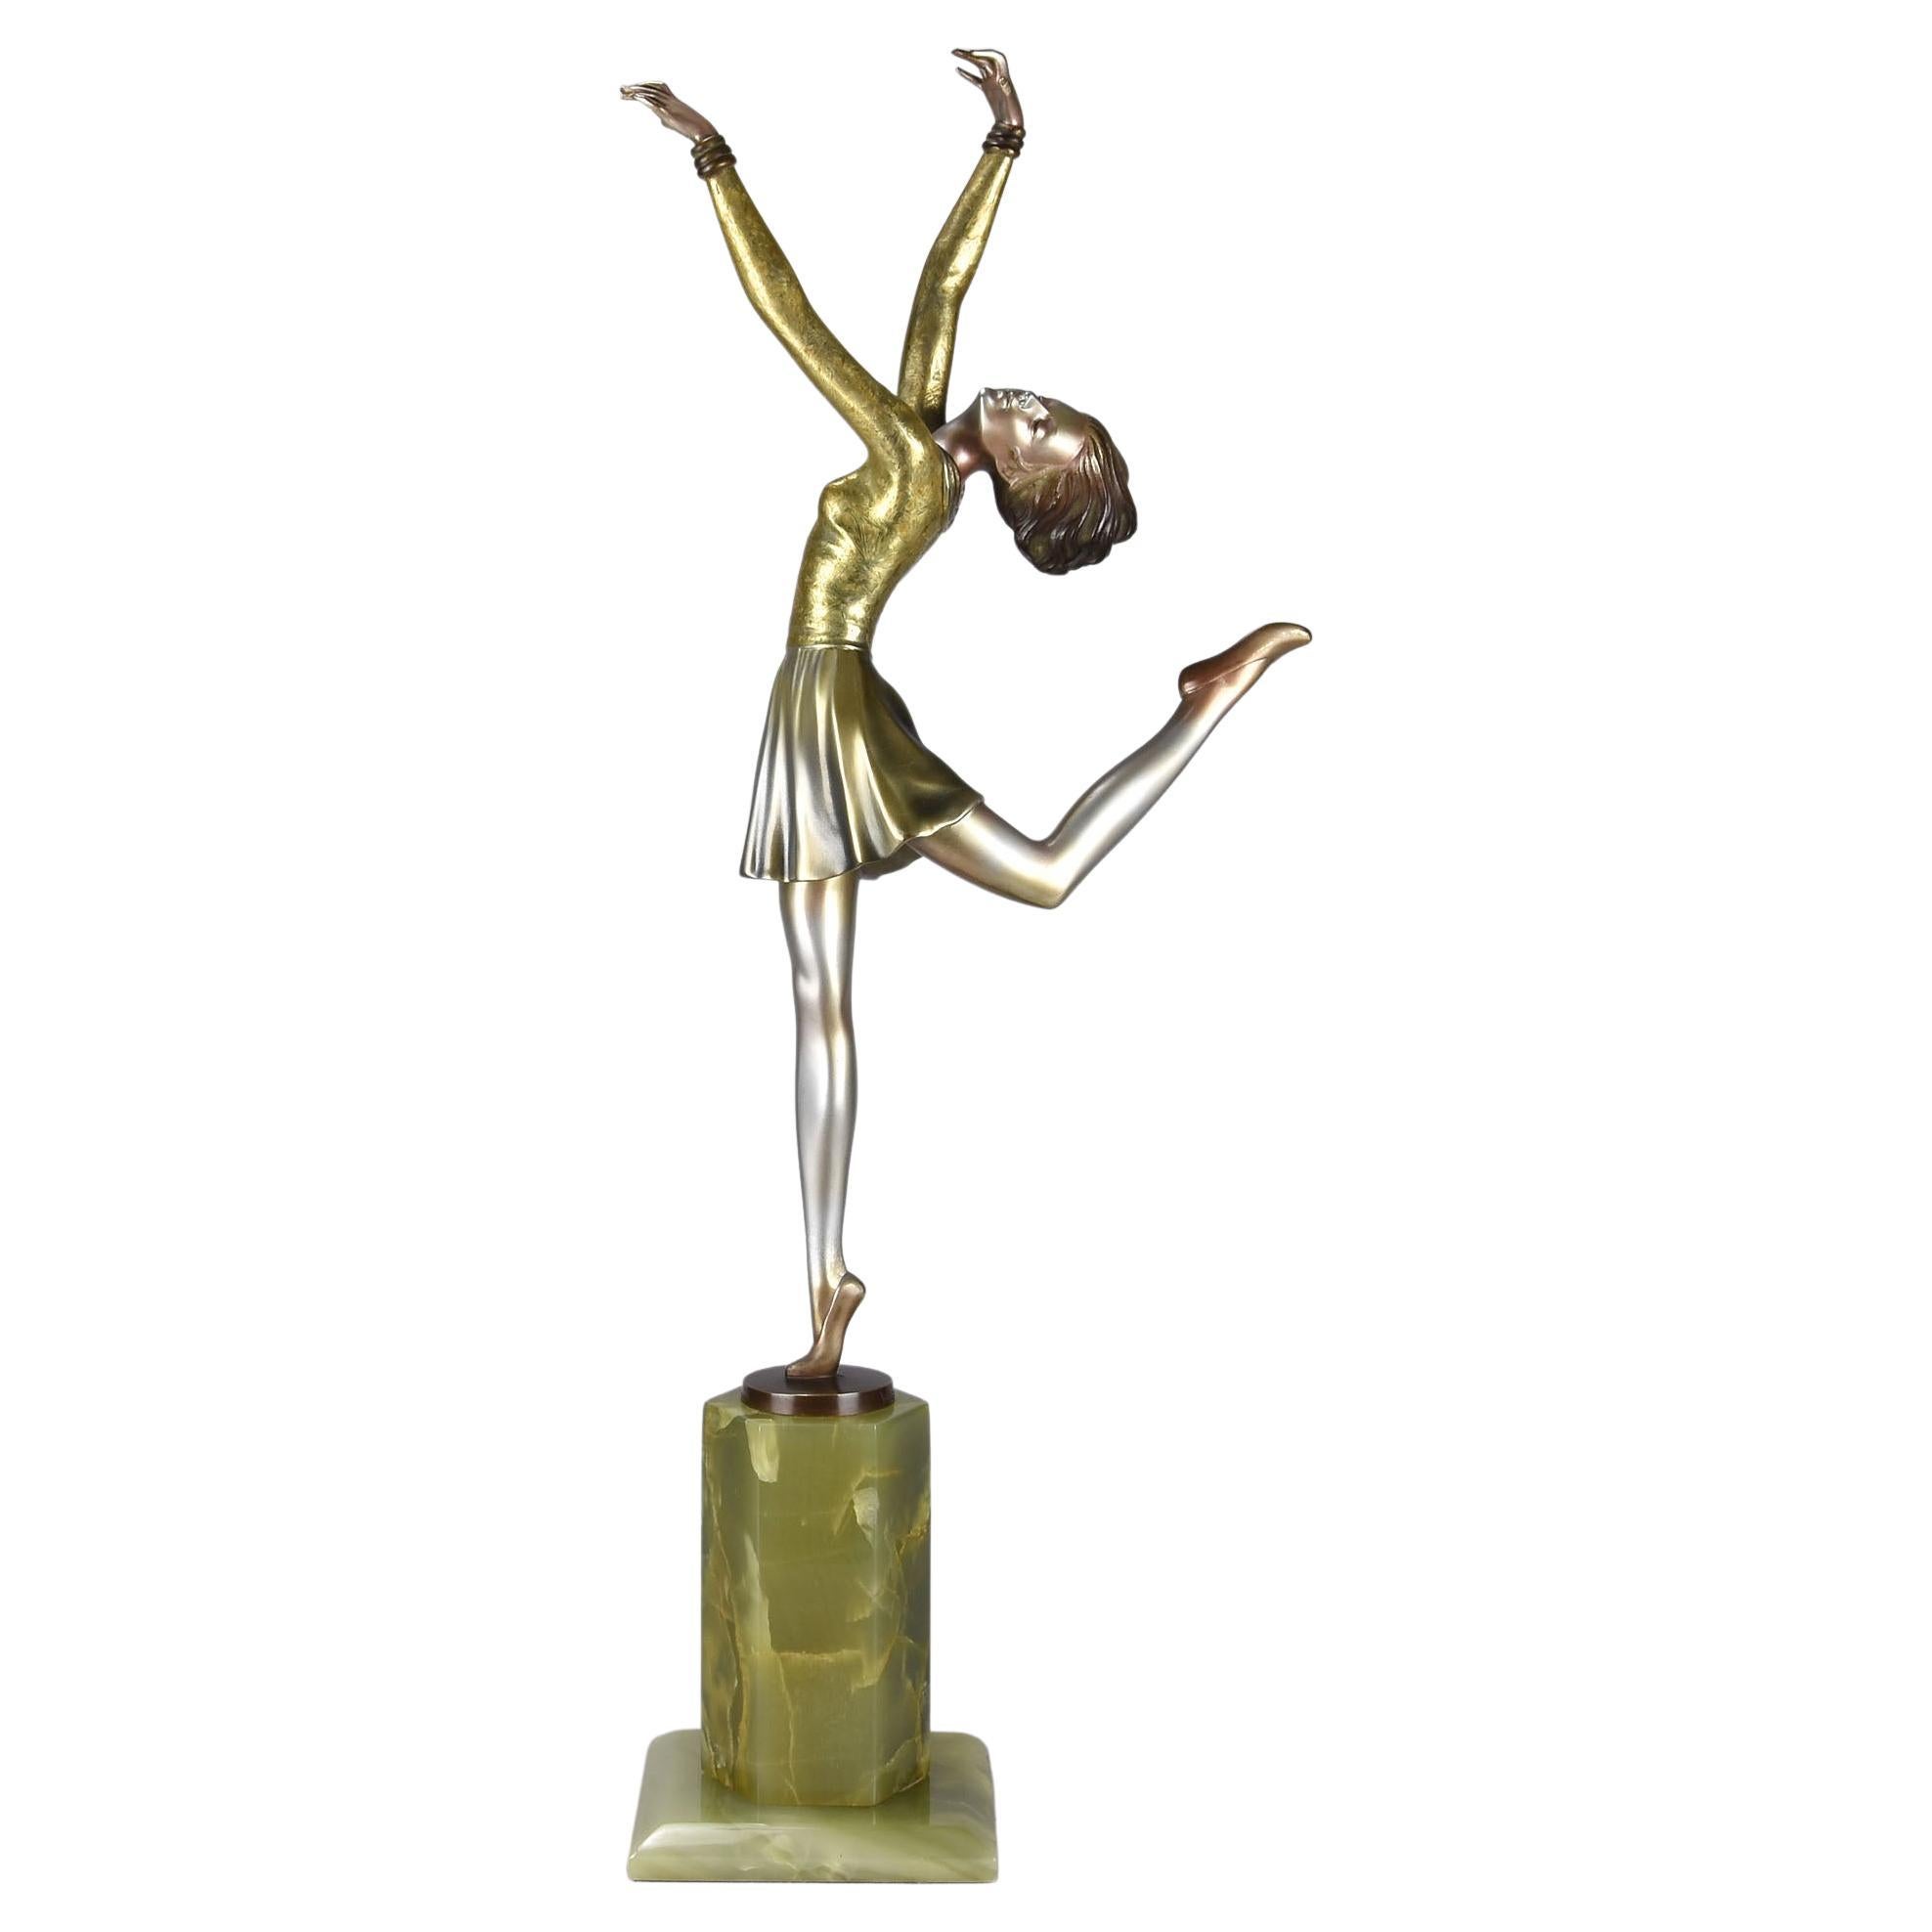 Early 20th Century Cold Painted Bronze Entitled "Art Deco Dancer" by Lorenzl